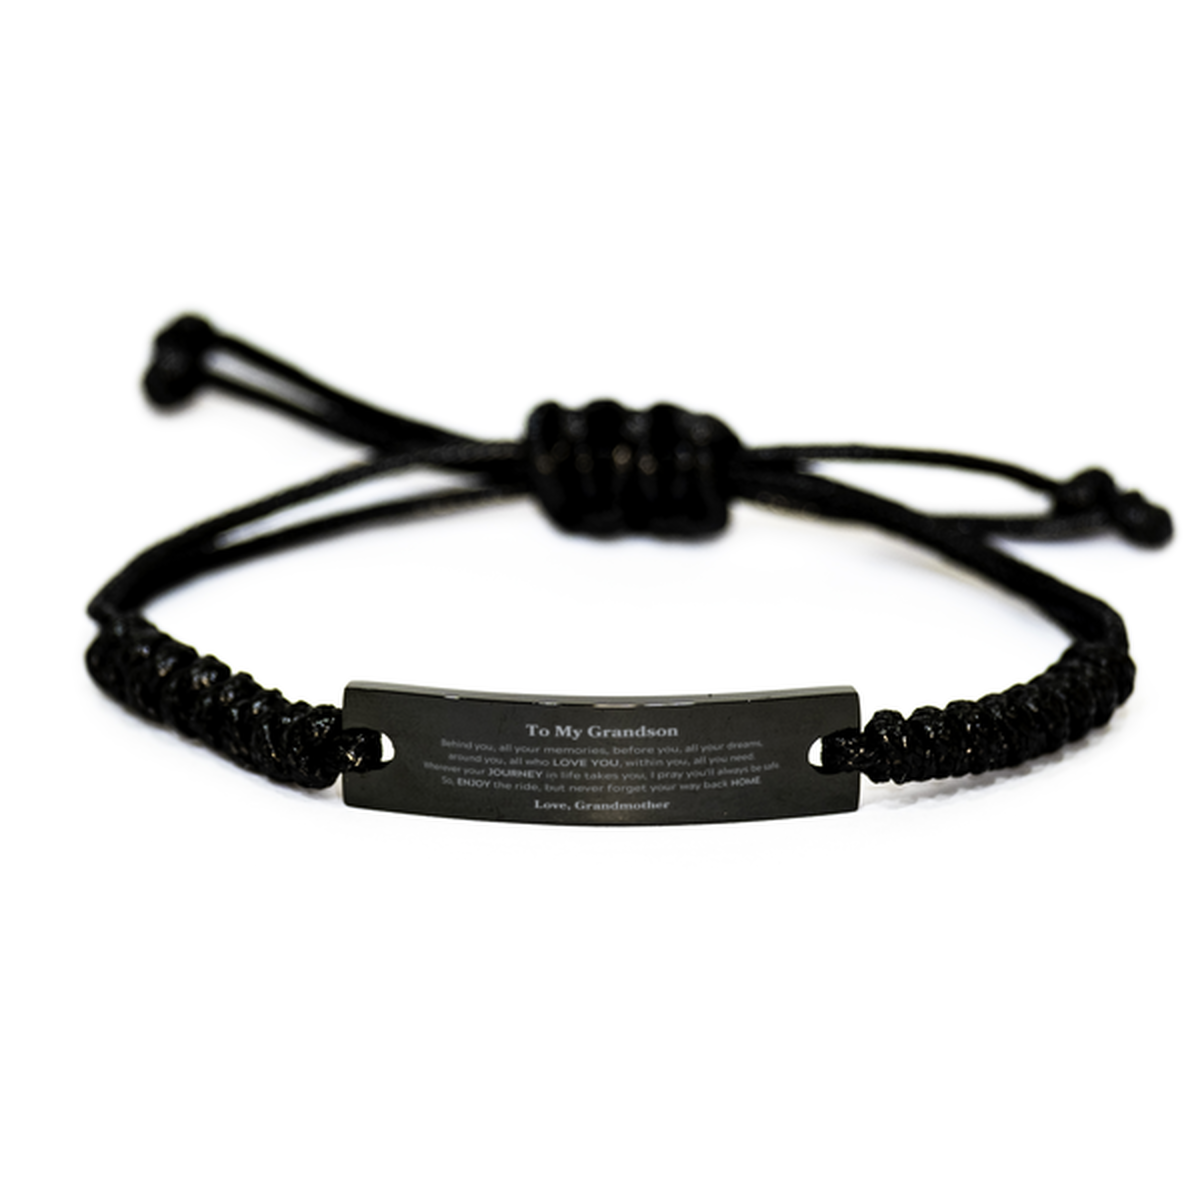 To My Grandson Graduation Gifts from Grandmother, Grandson Black Rope Bracelet Christmas Birthday Gifts for Grandson Behind you, all your memories, before you, all your dreams. Love, Grandmother